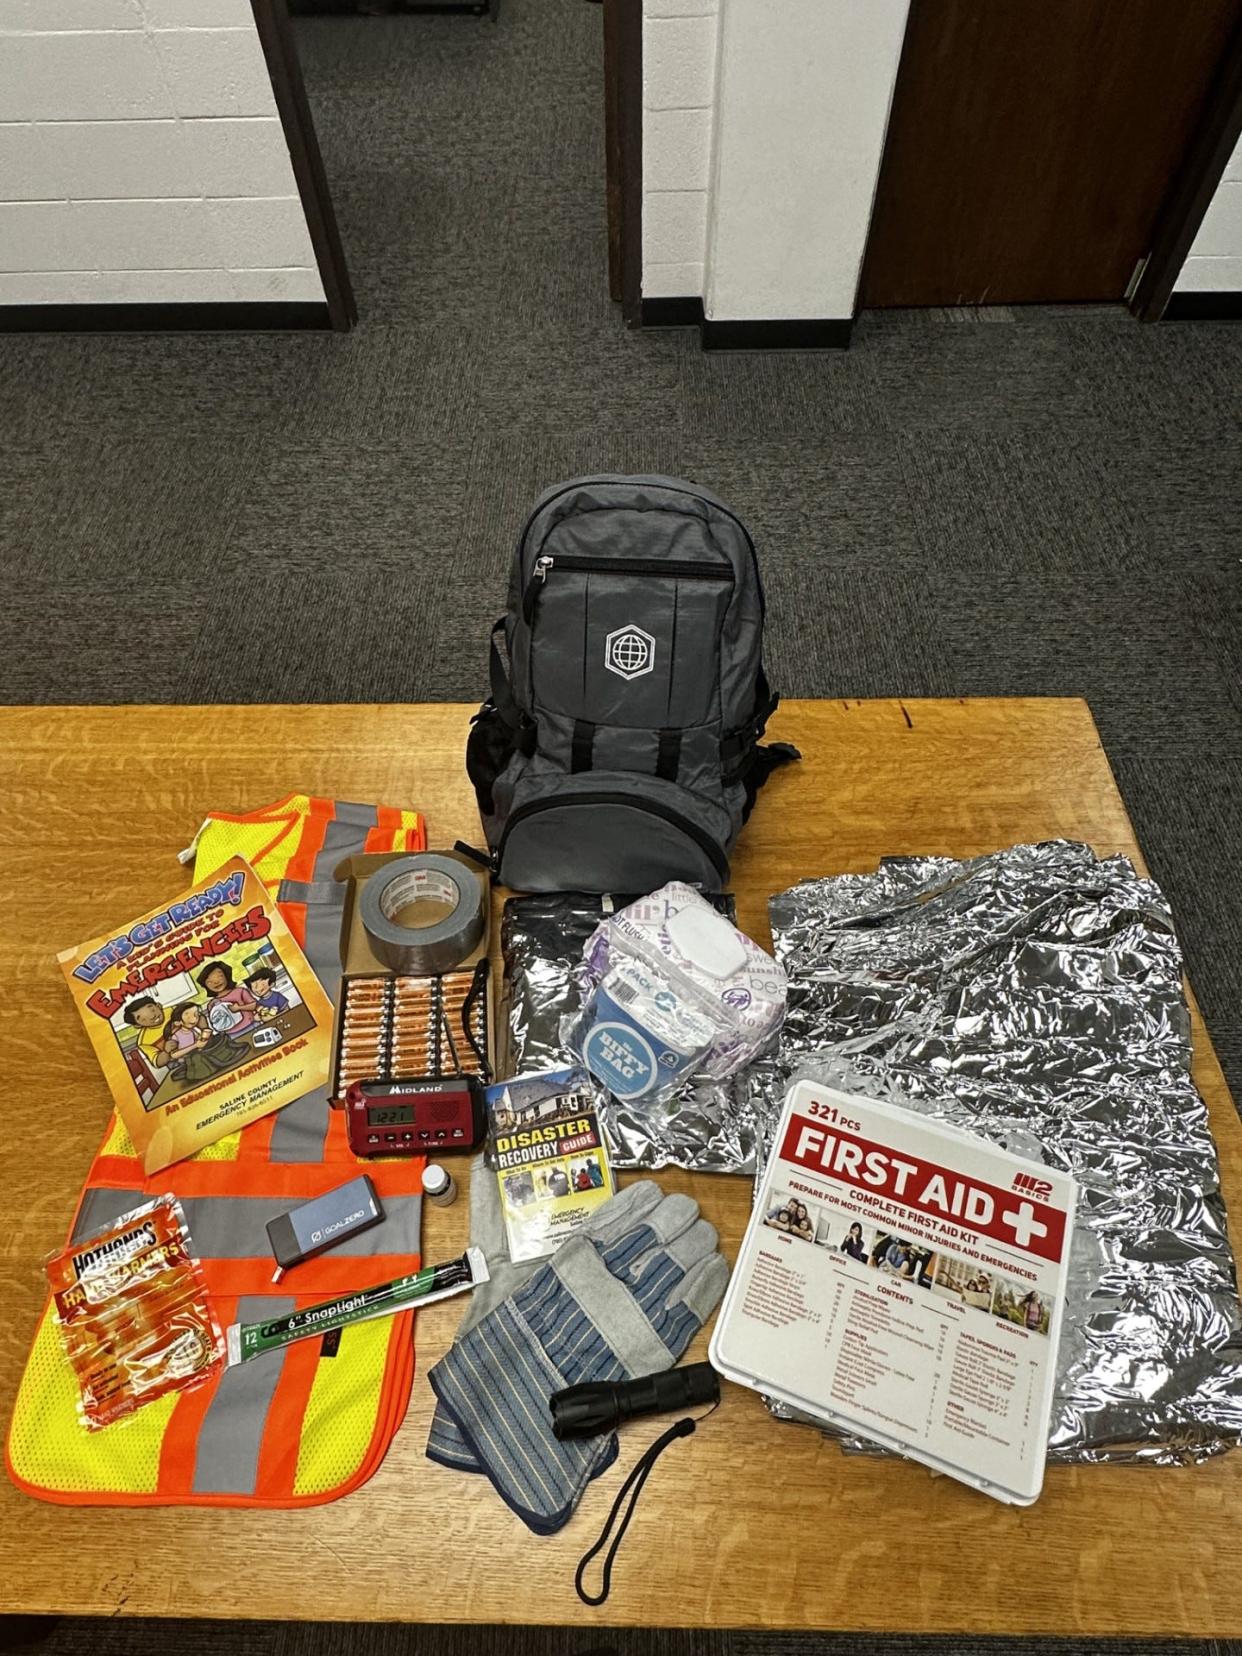 The Saline County Department of Emergency Management Disaster suggests residents keep disaster preparedness kits like the one shown here. Disaster kits should include items such as flashlights, portable charging stations, water purifying tablets, batteries and more.